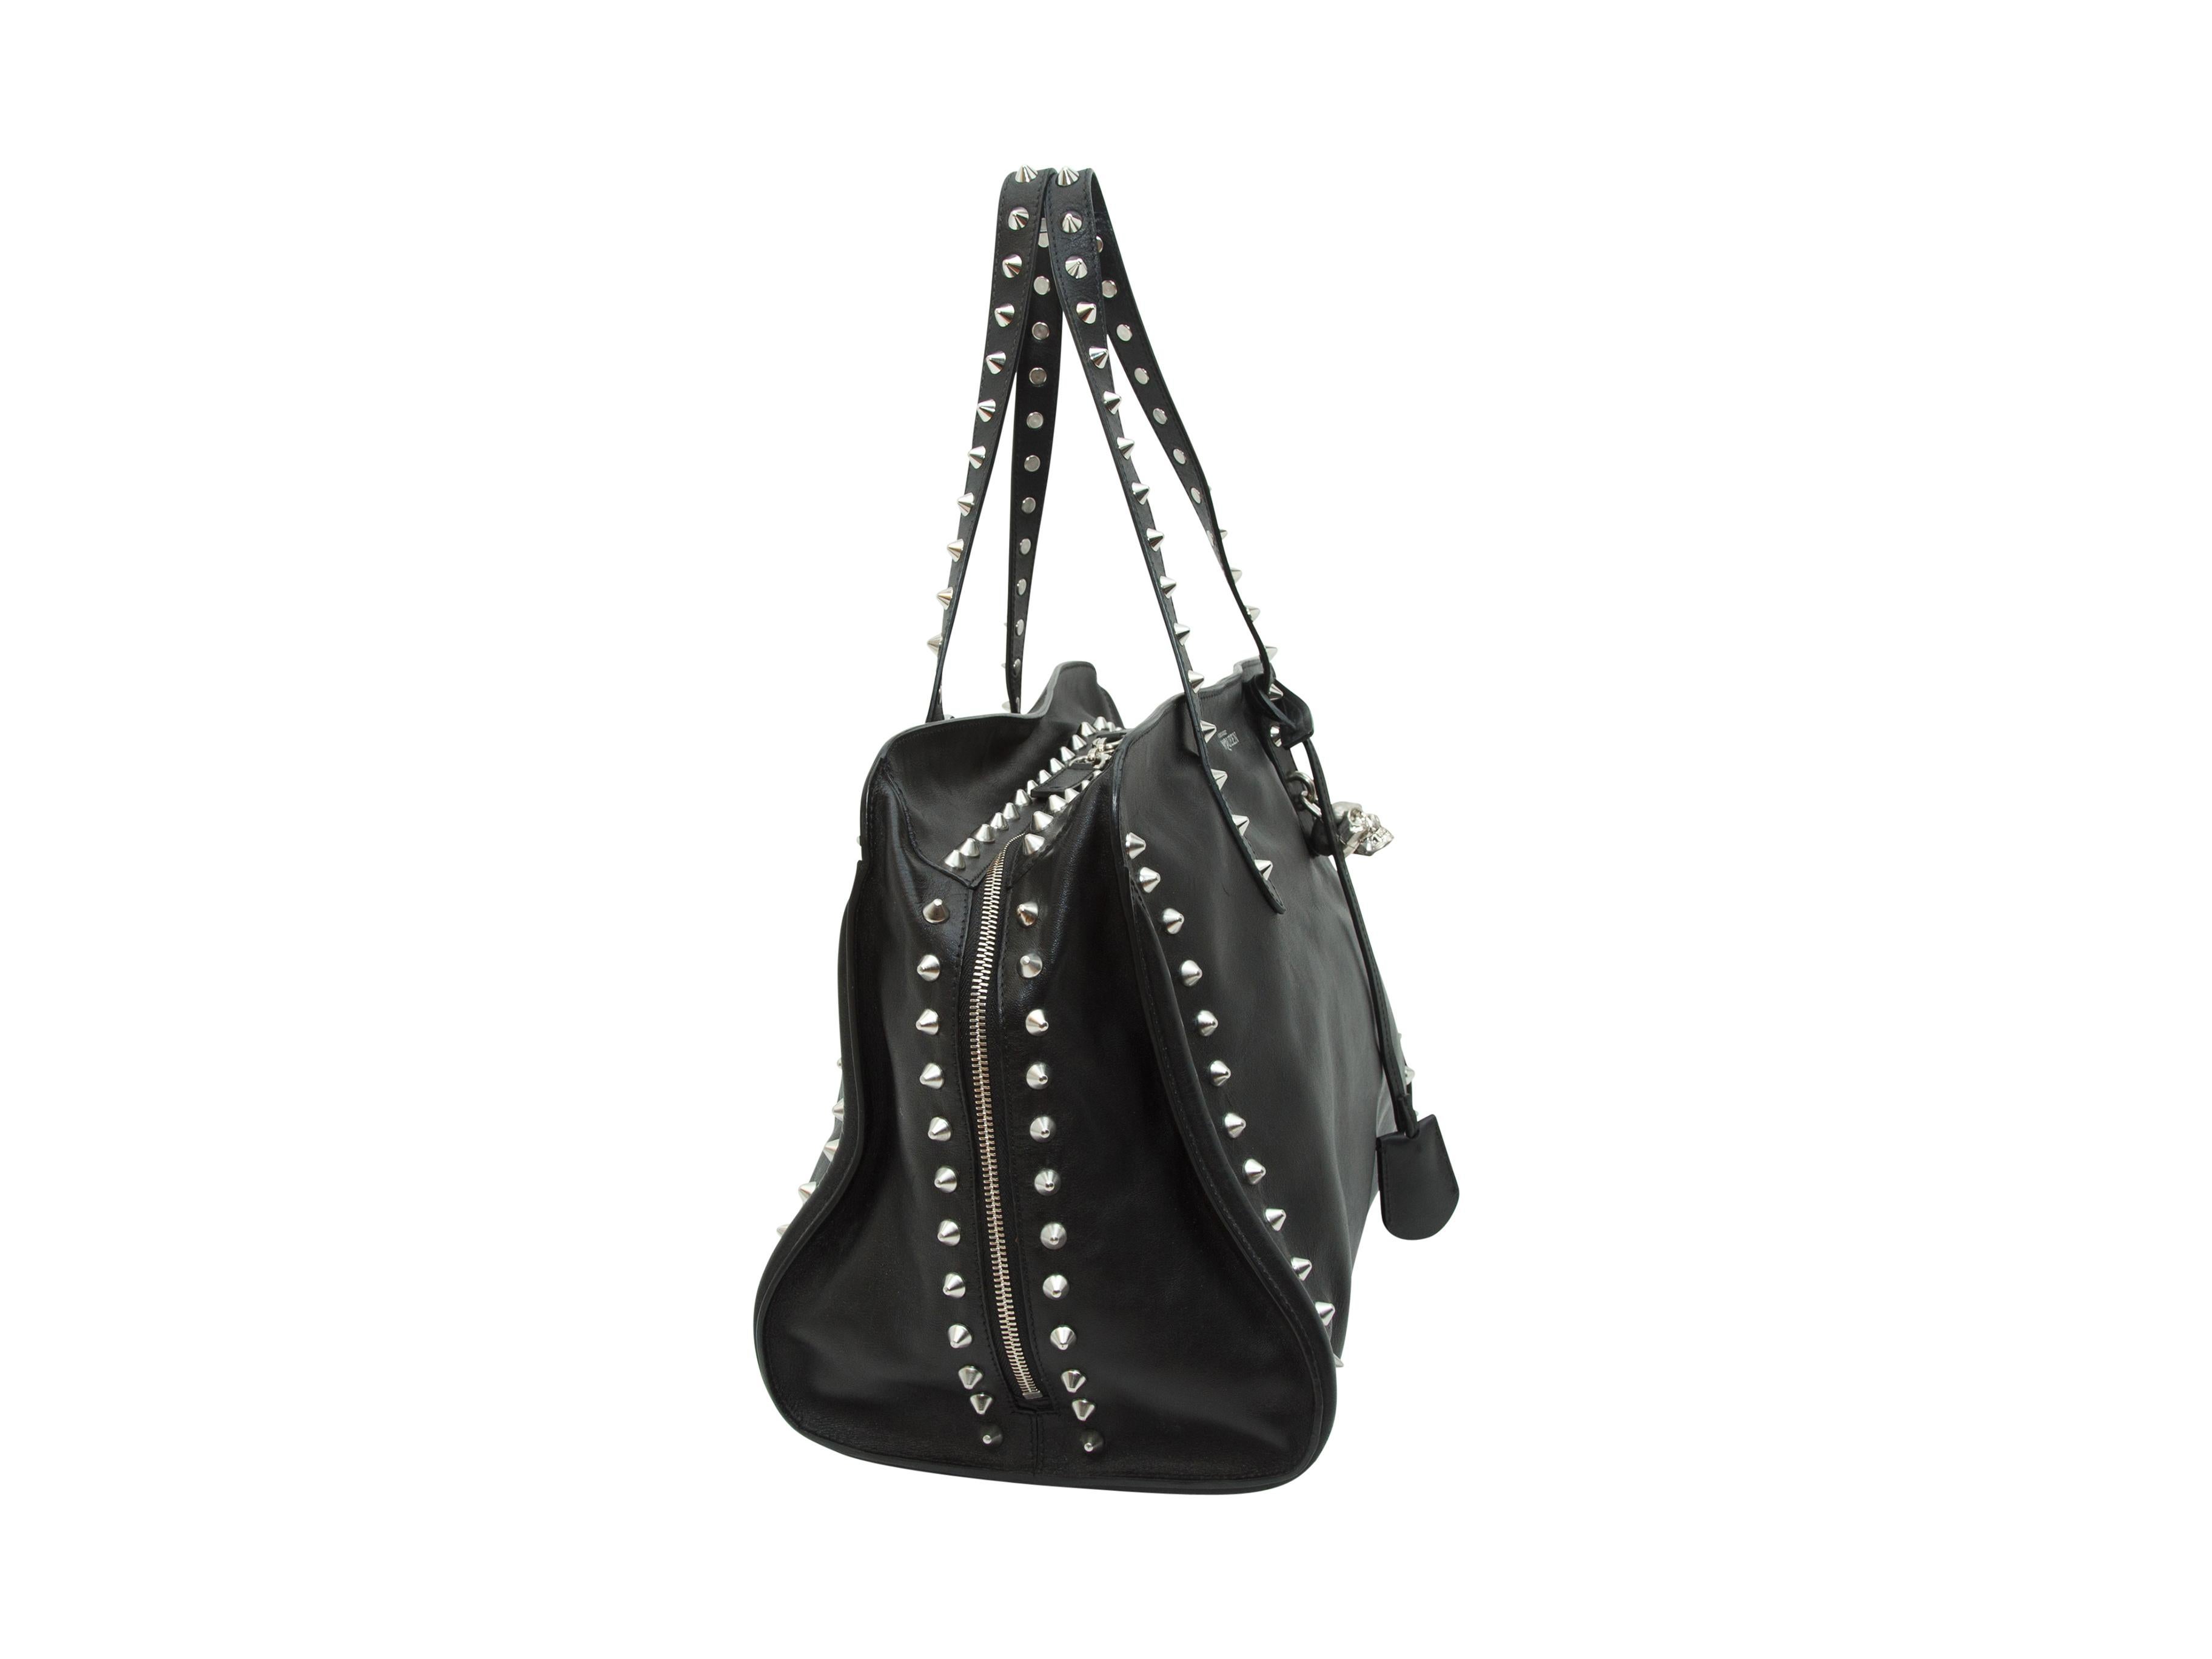 Women's Alexander McQueen Black Studded Leather Tote Bag